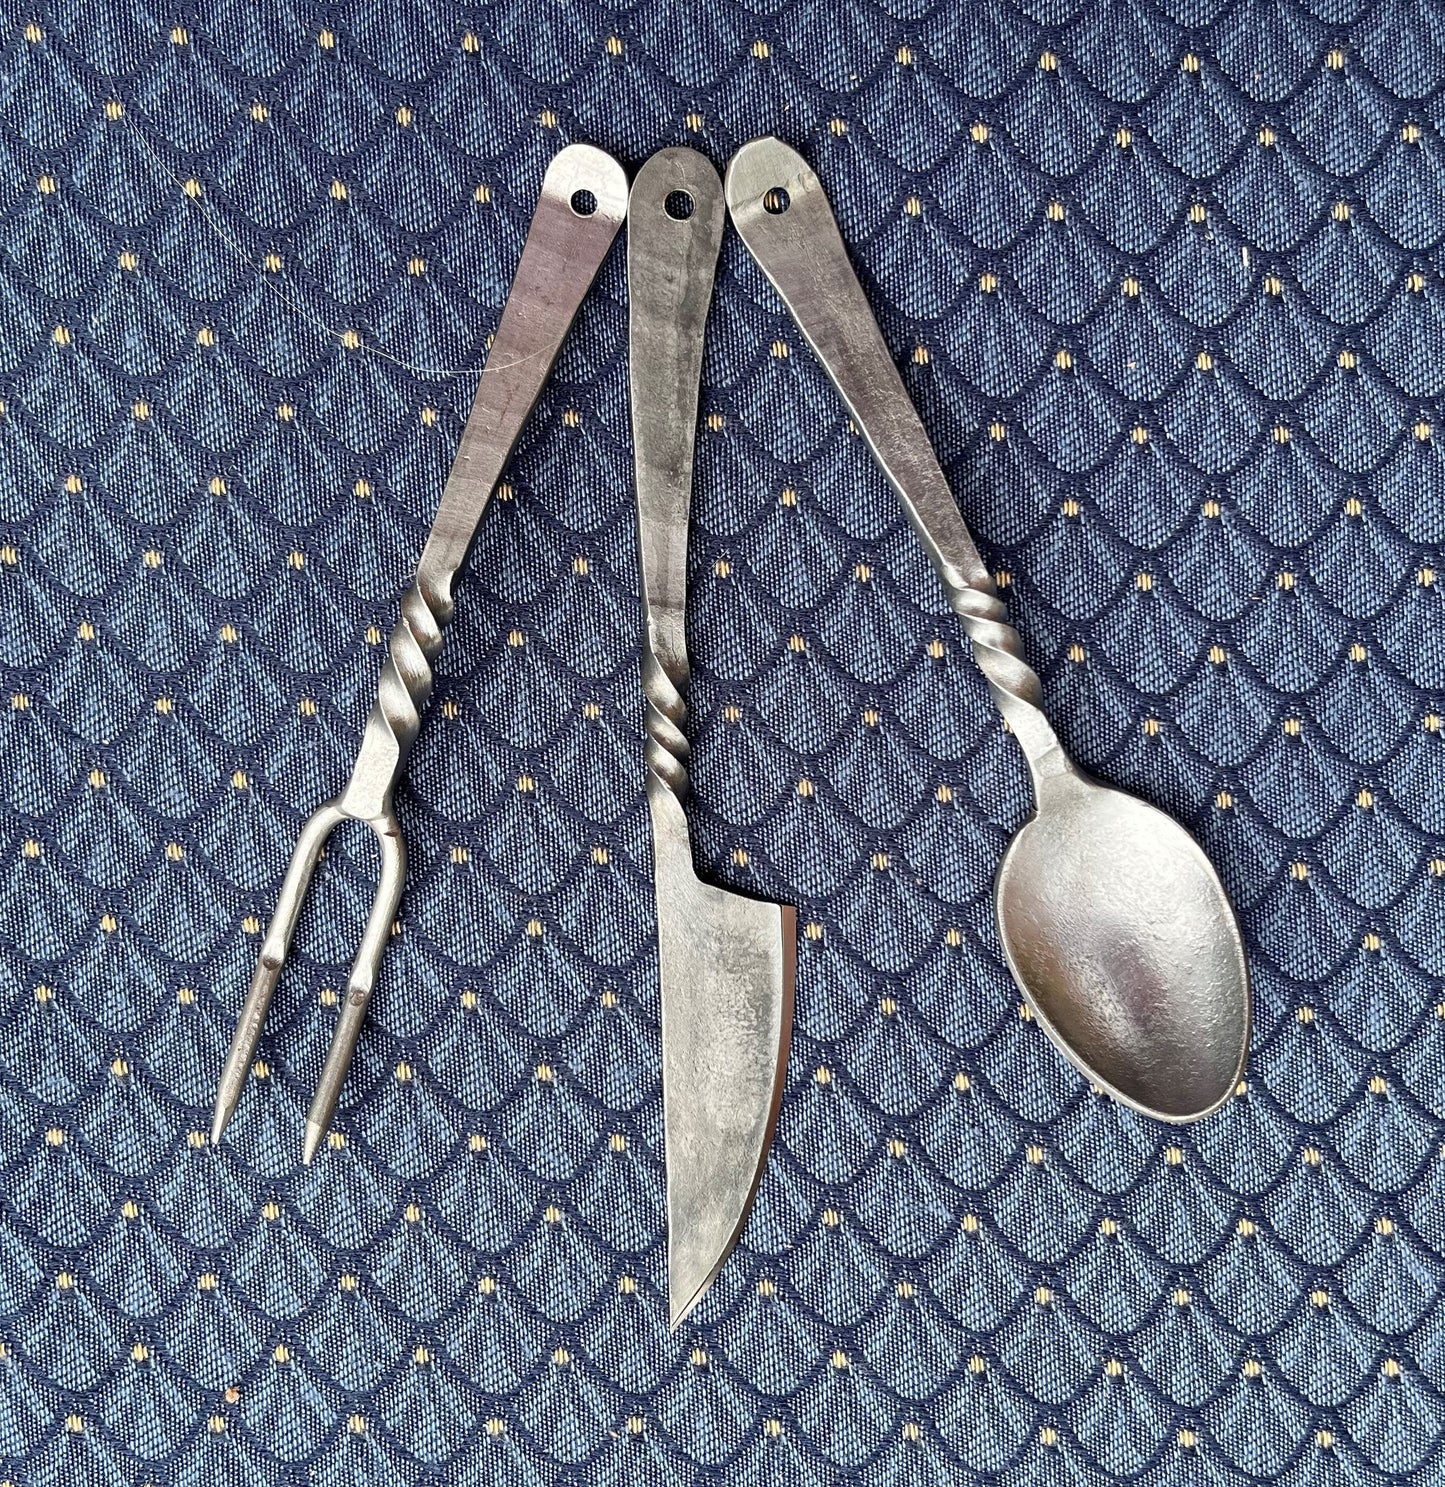 Hand-forged cutlery set - 3 piece medieval style